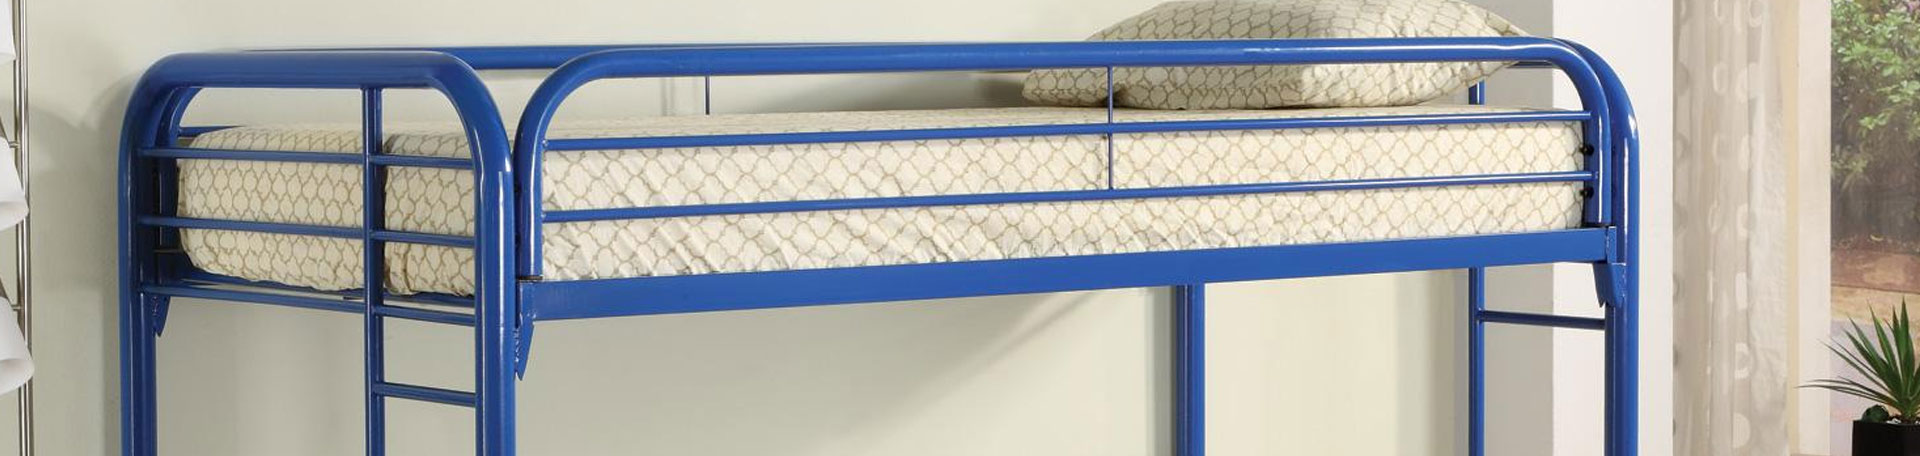 bunk beds supplier in India